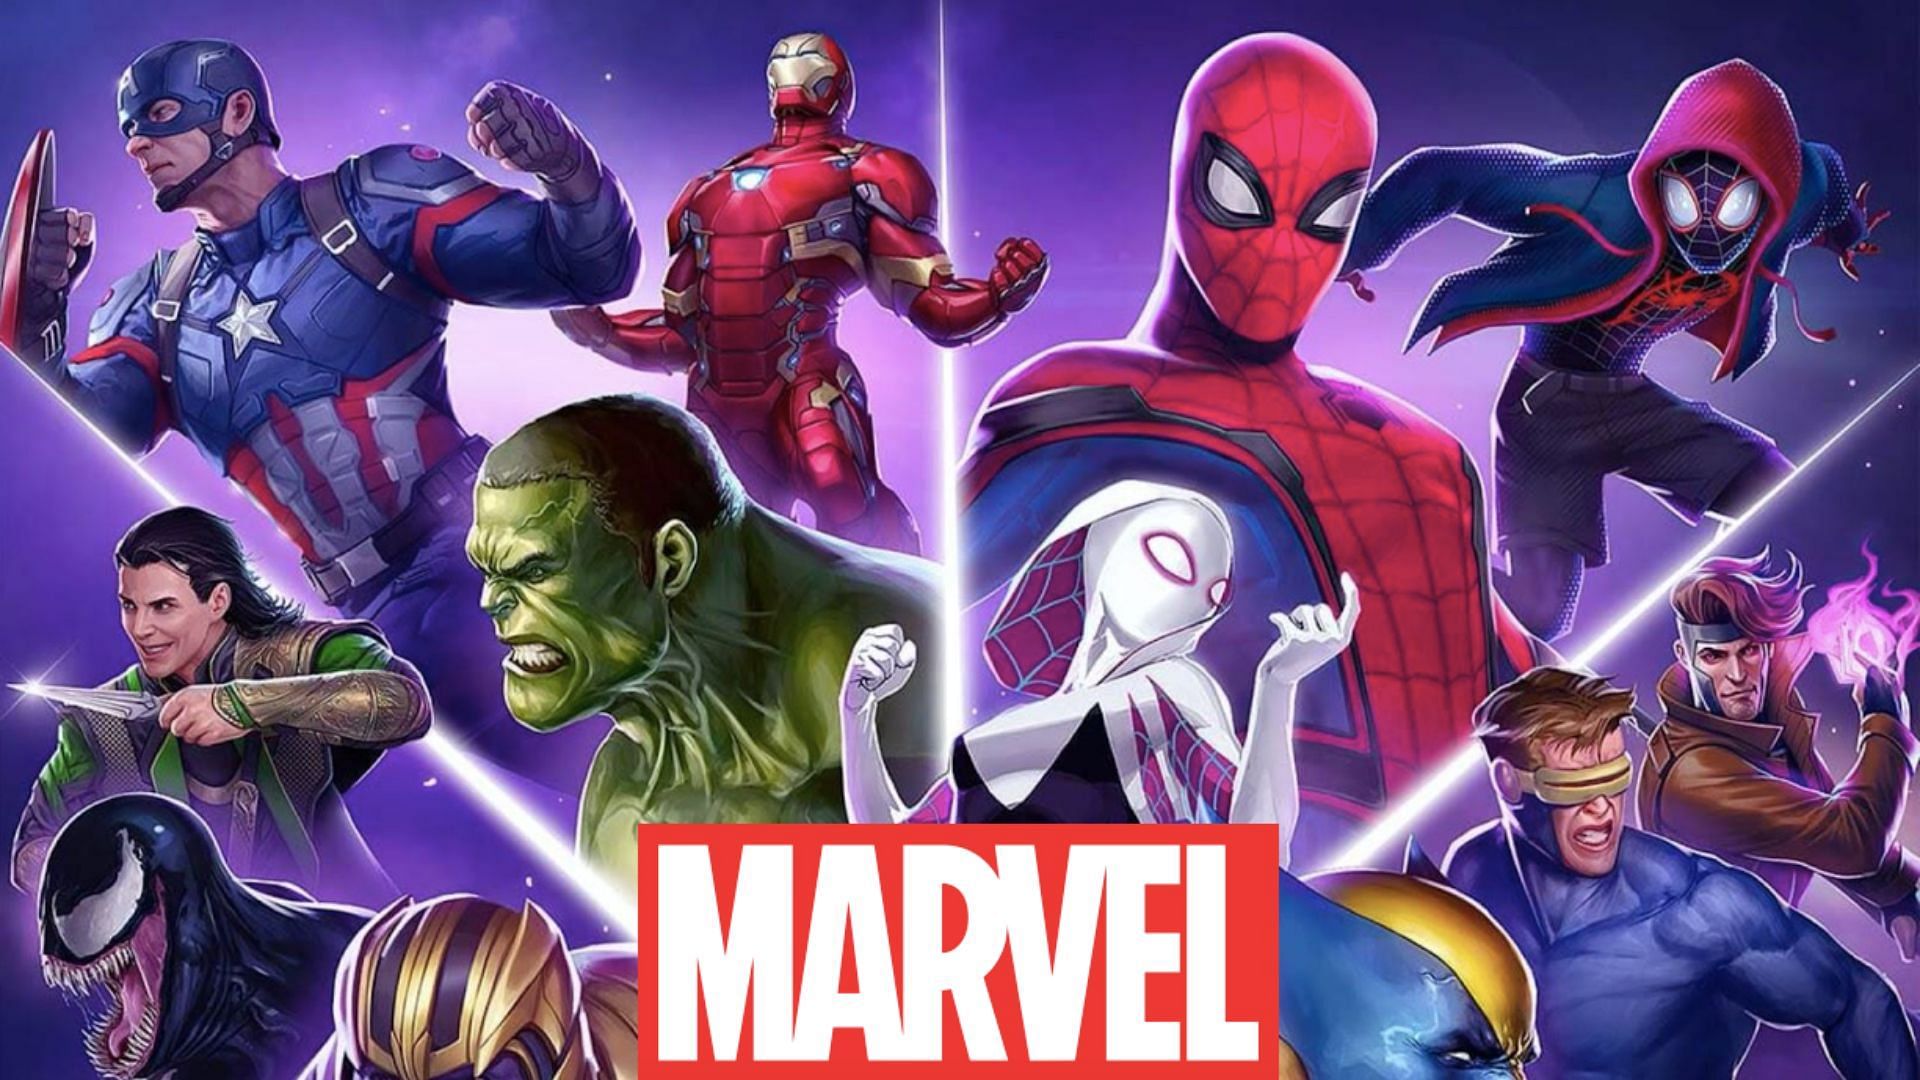 Marvel Strike Force Mobile RPG Game Lets You Play As Iconic